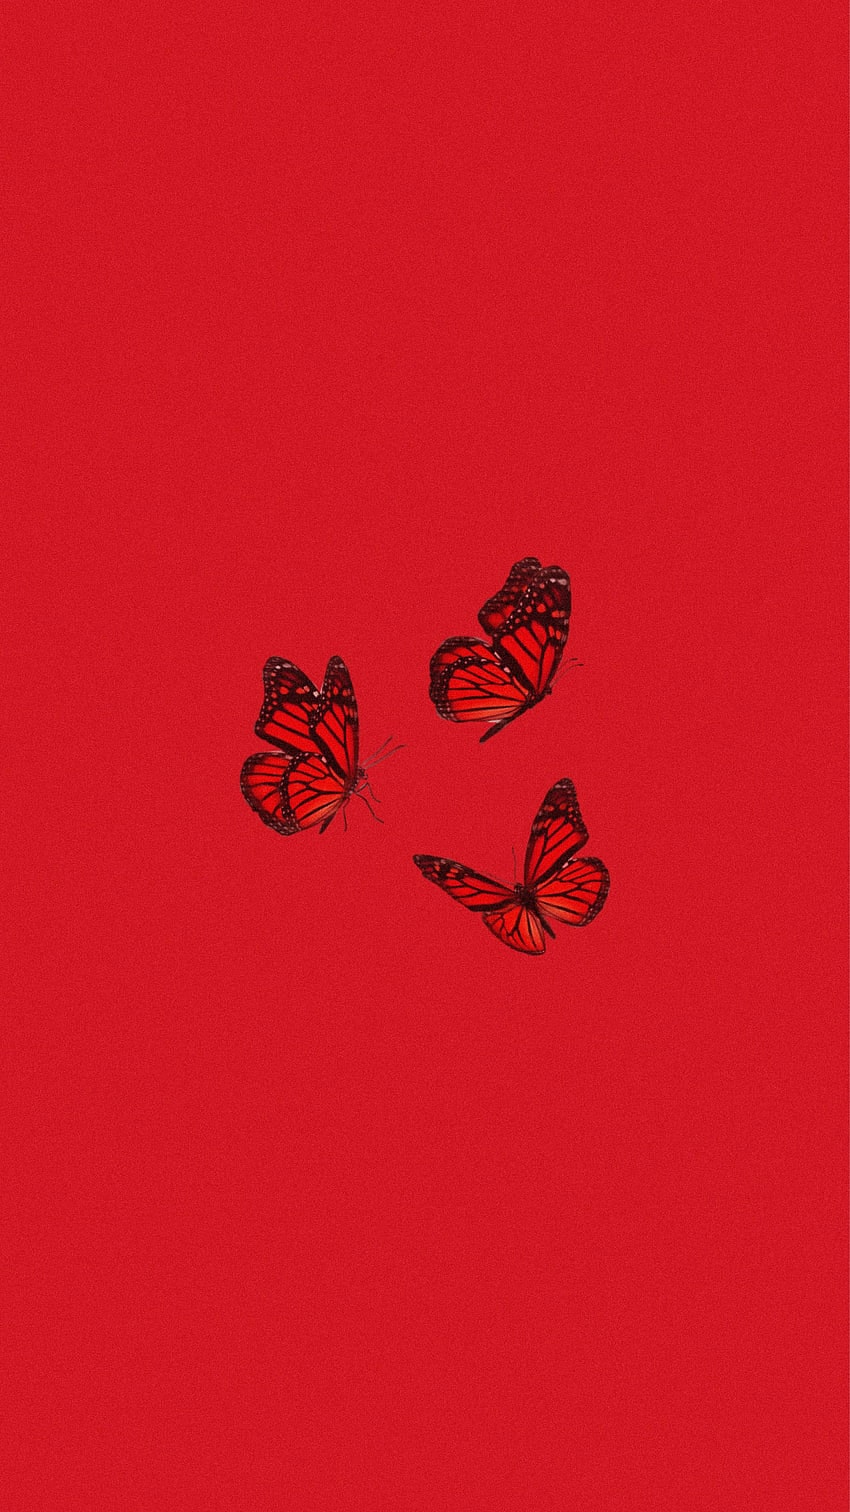 Red Iphone Wallpaper